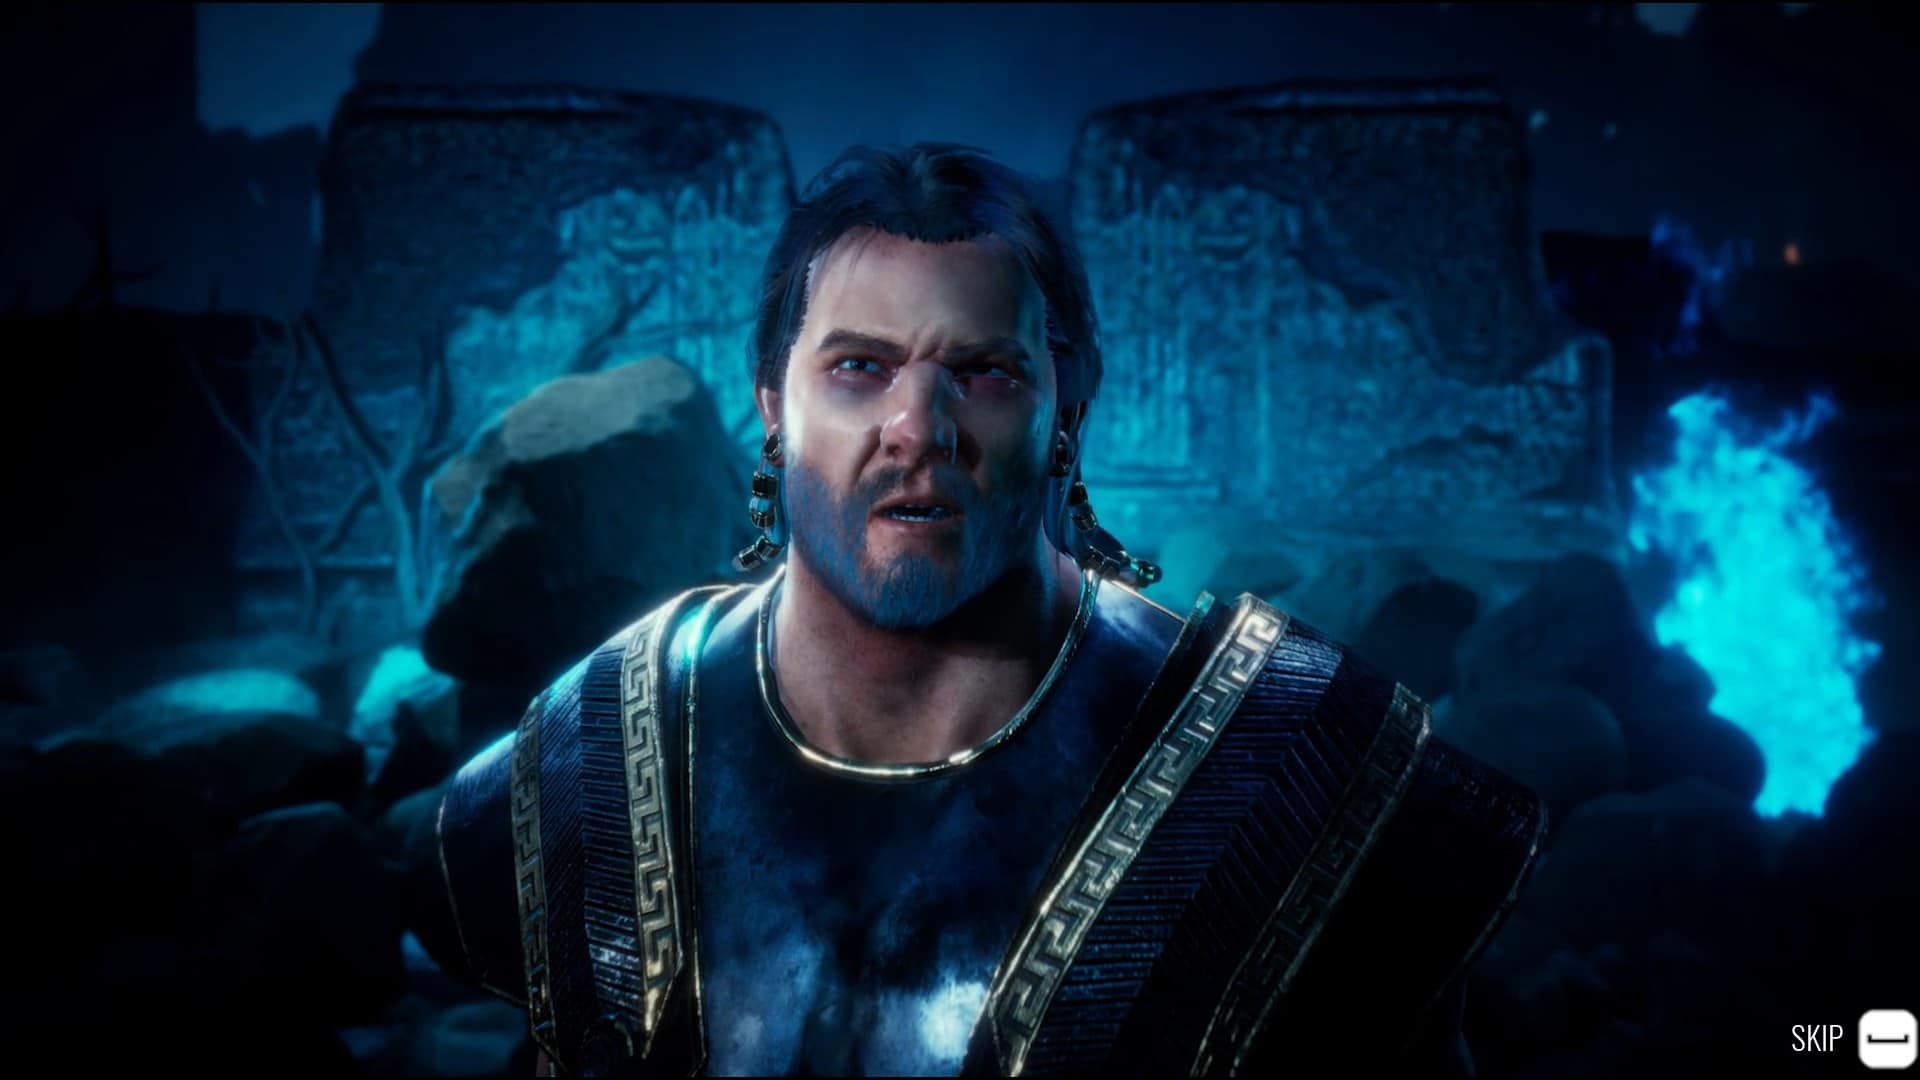 (The facial features in the cutscenes could use some fine-tuning.)